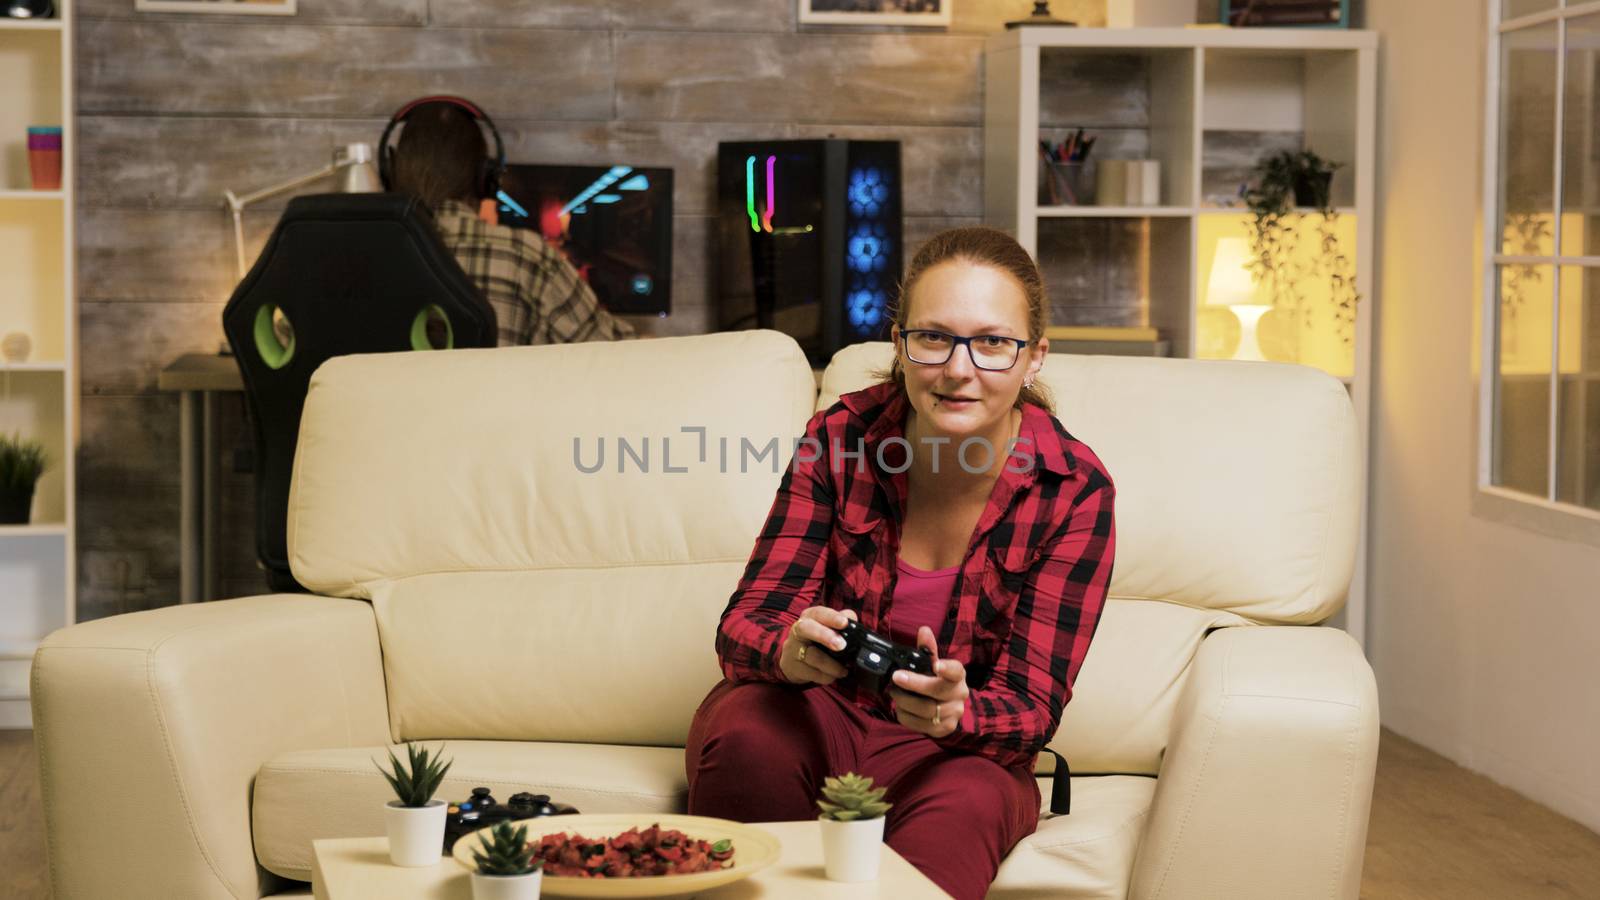 Woman sitting on couch in living room playing video games using wireless controllers. Boyfriend playing games on computer in the background.